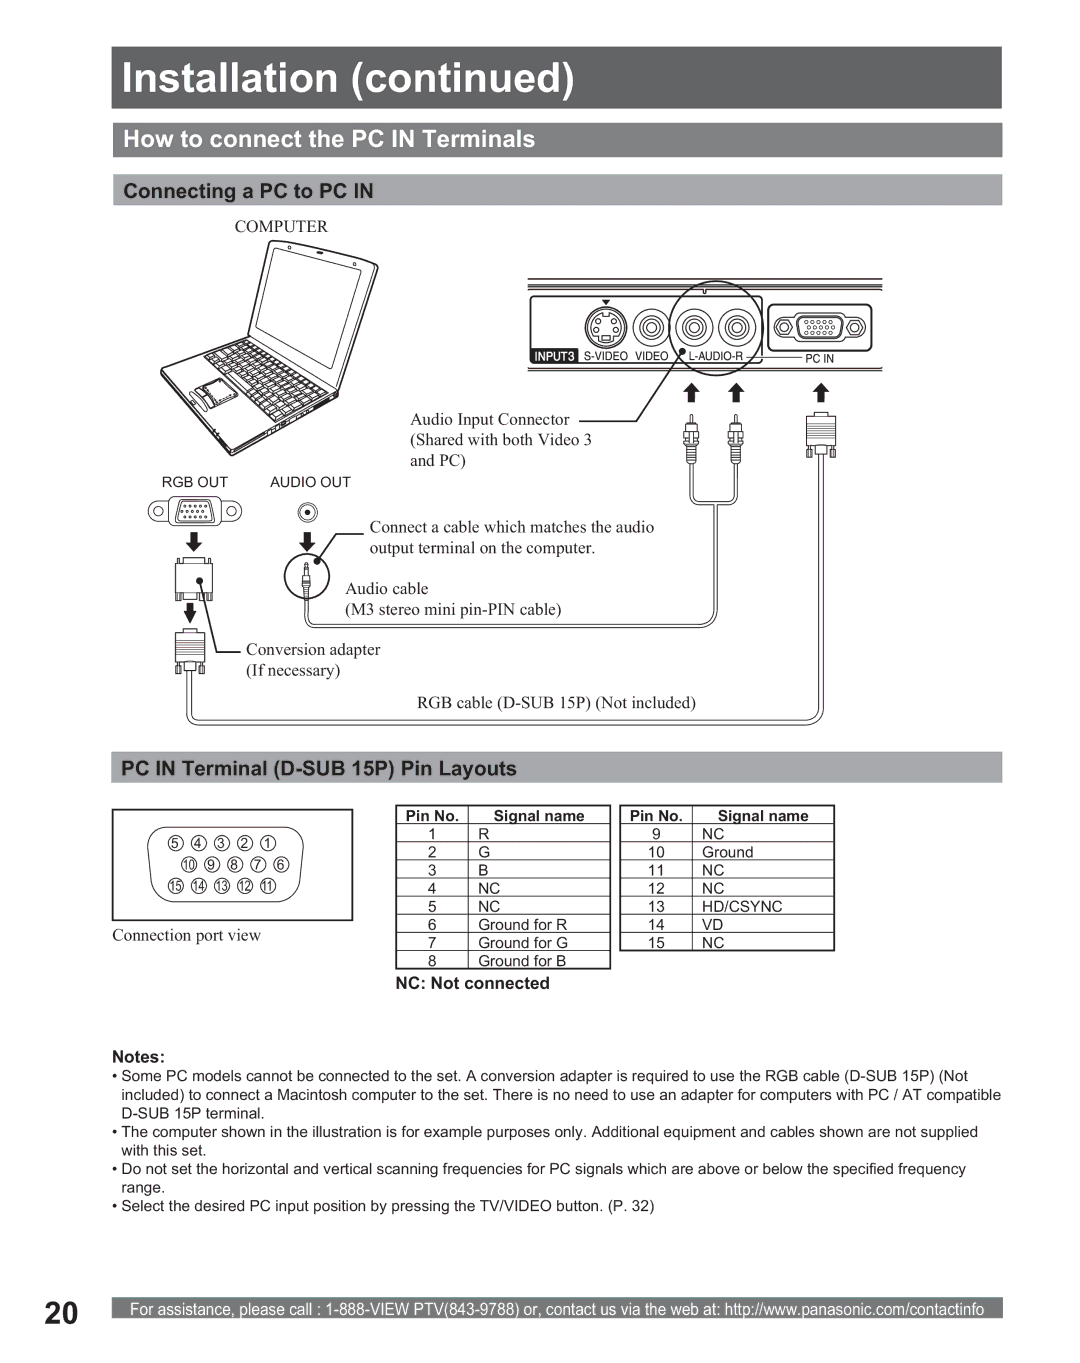 Panasonic PT 56DLX75 manual How to connect the PC in Terminals, Connecting a PC to PC, PC in Terminal D-SUB 15P Pin Layouts 